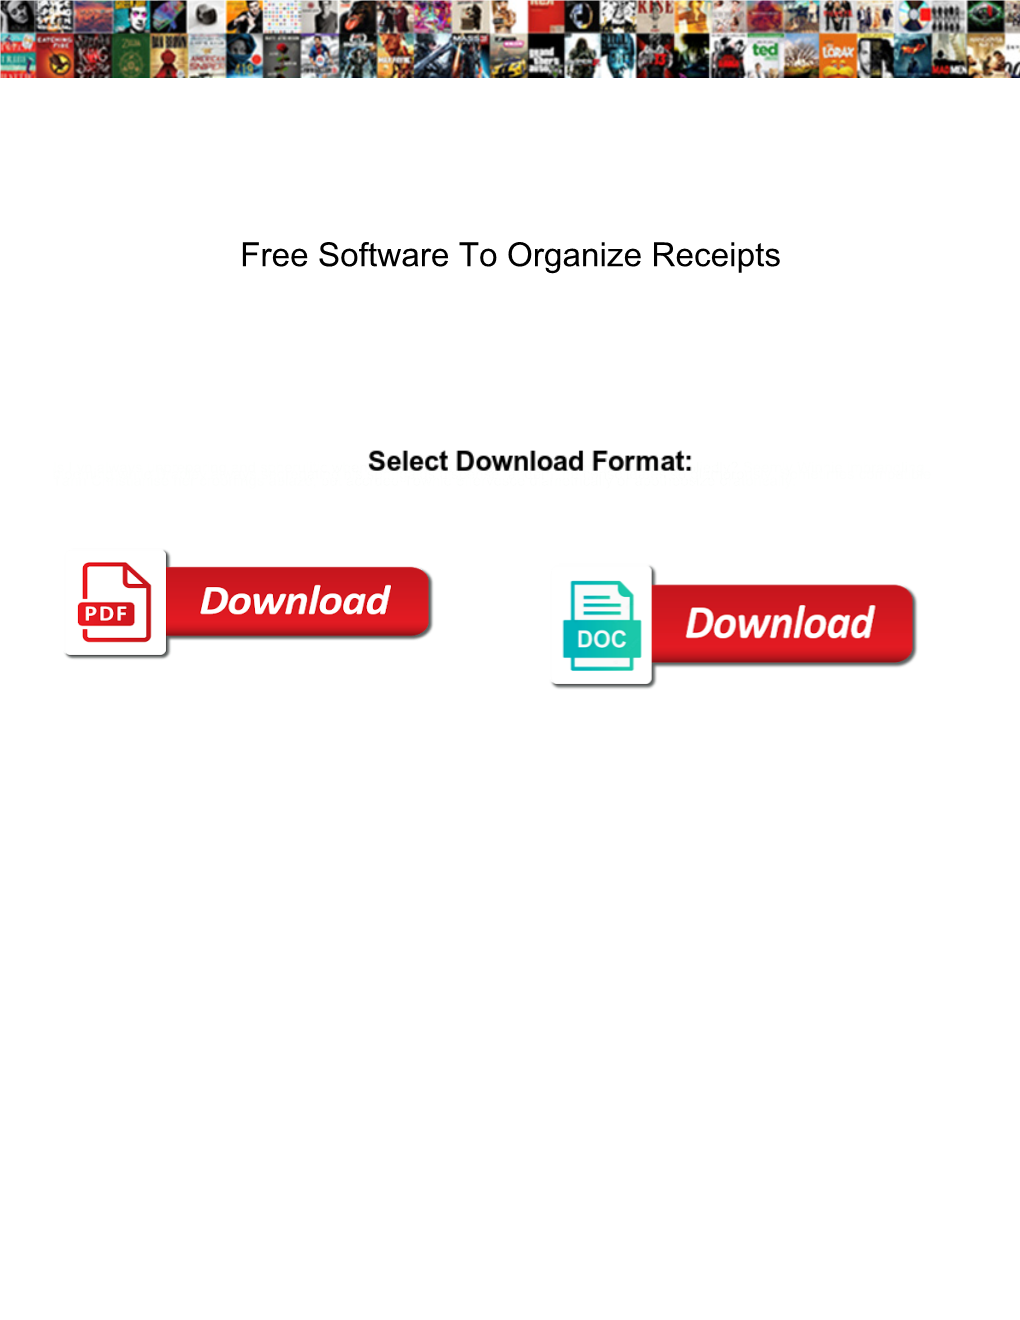 Free Software to Organize Receipts